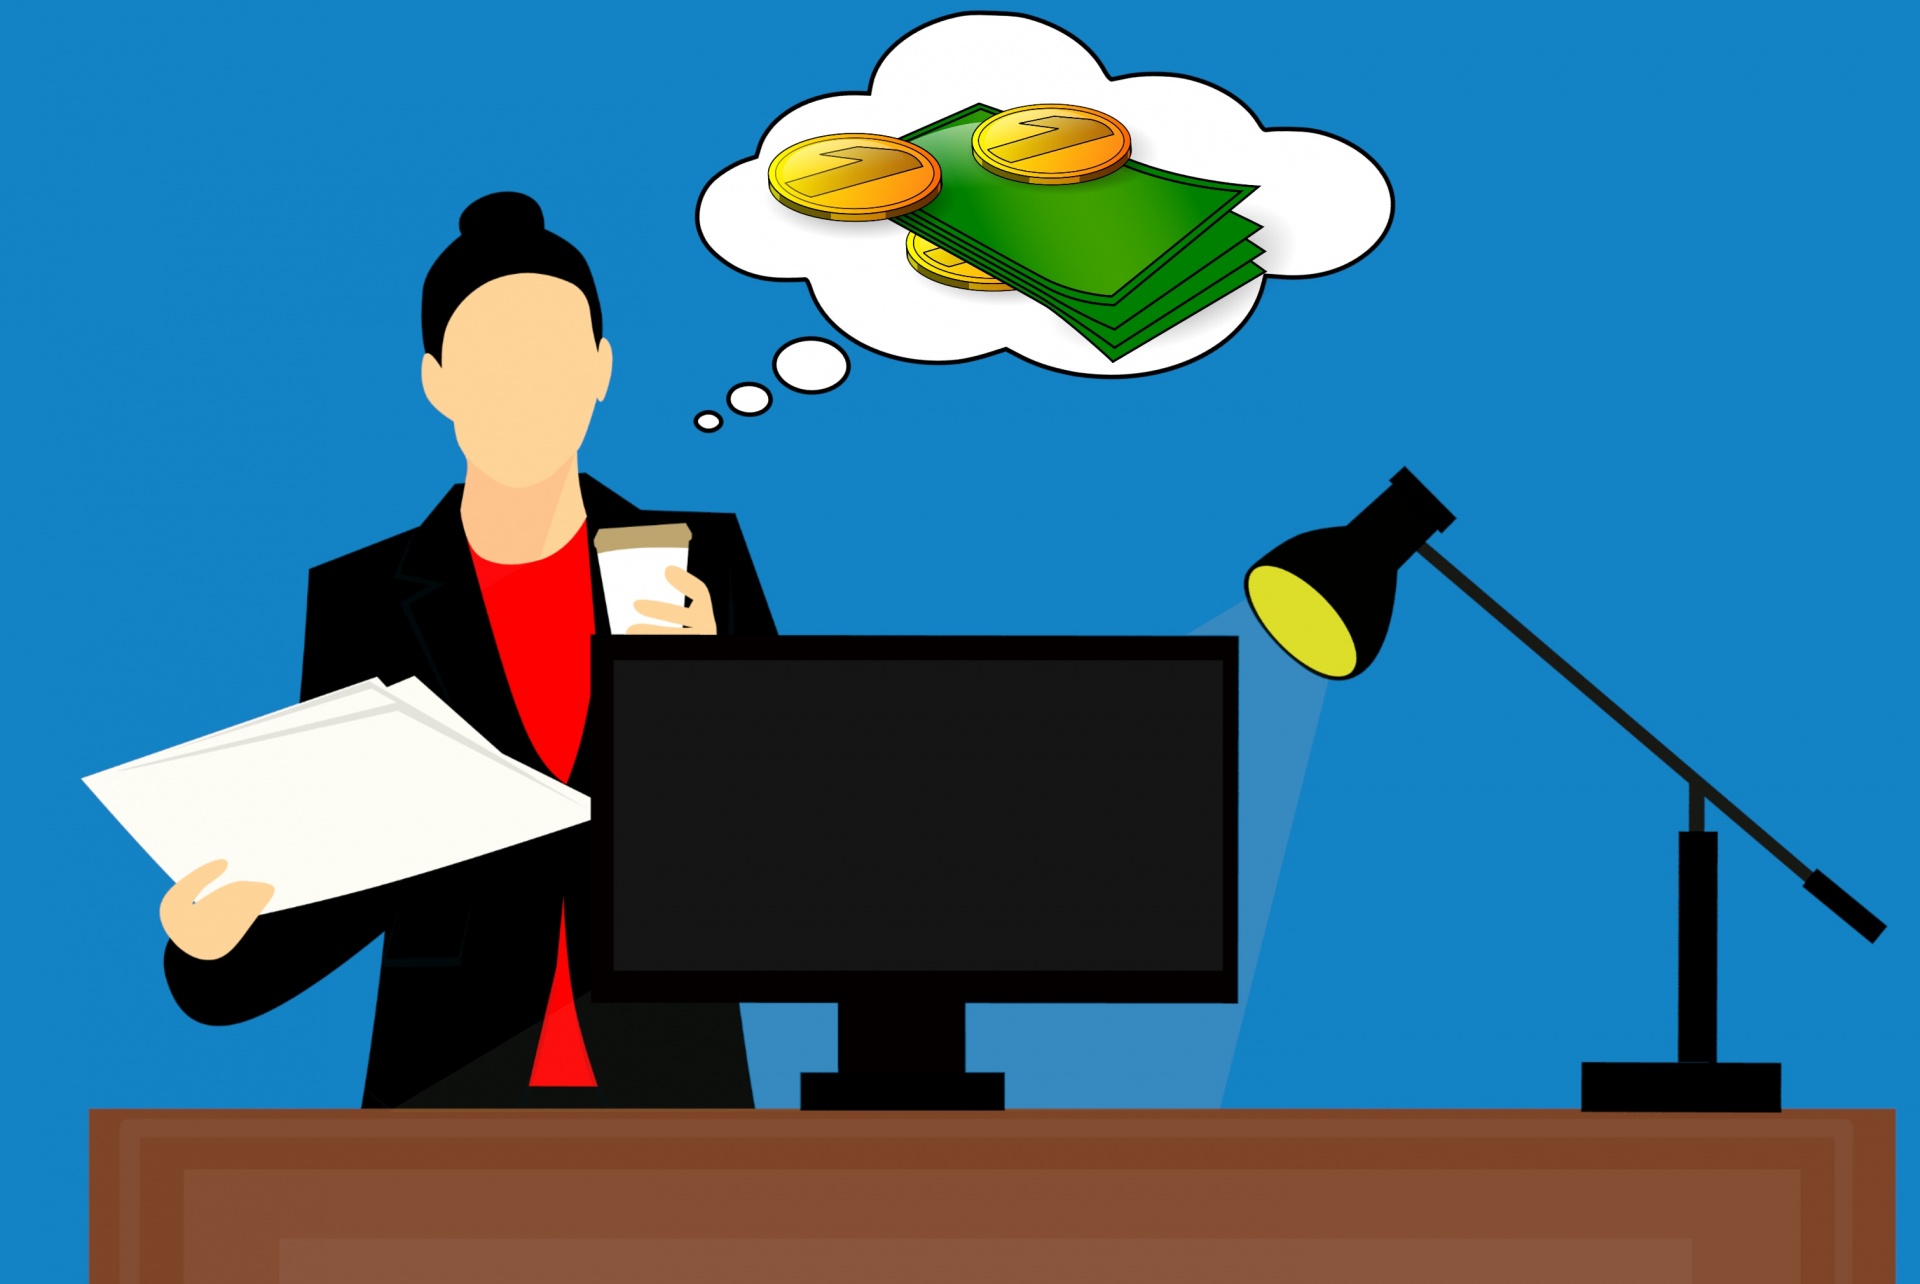 Illustration of a woman standing at an office with a folder in one hand and a cup of coffee in the other, with a thought bubble showing money above her head